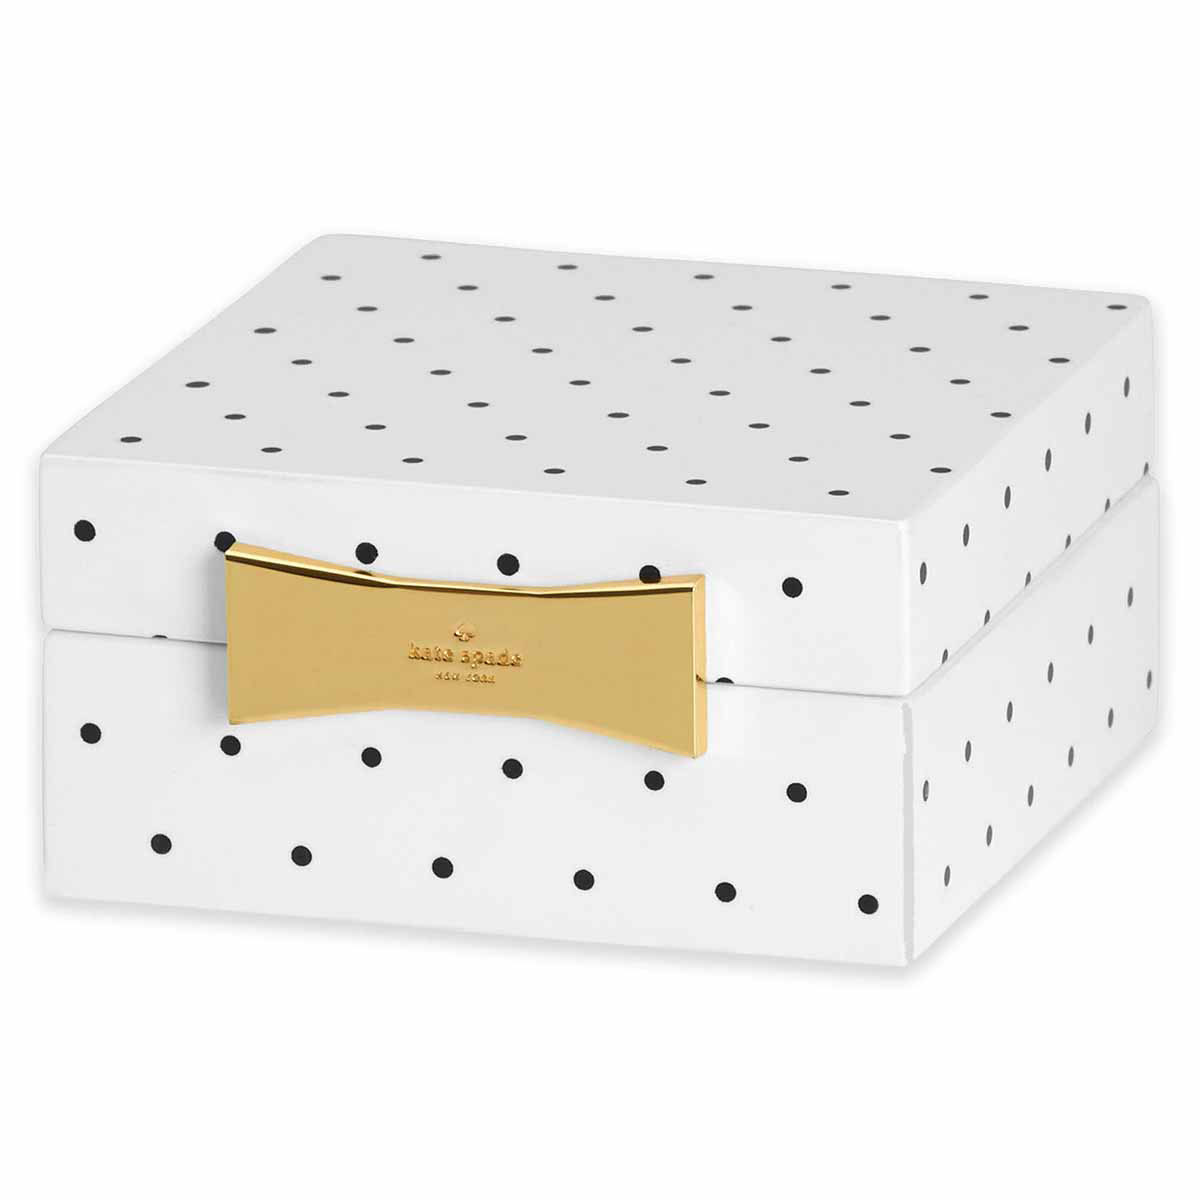 Kate Spade New York, Lenox Outpost Gifting Square Jewelry Box, Spot